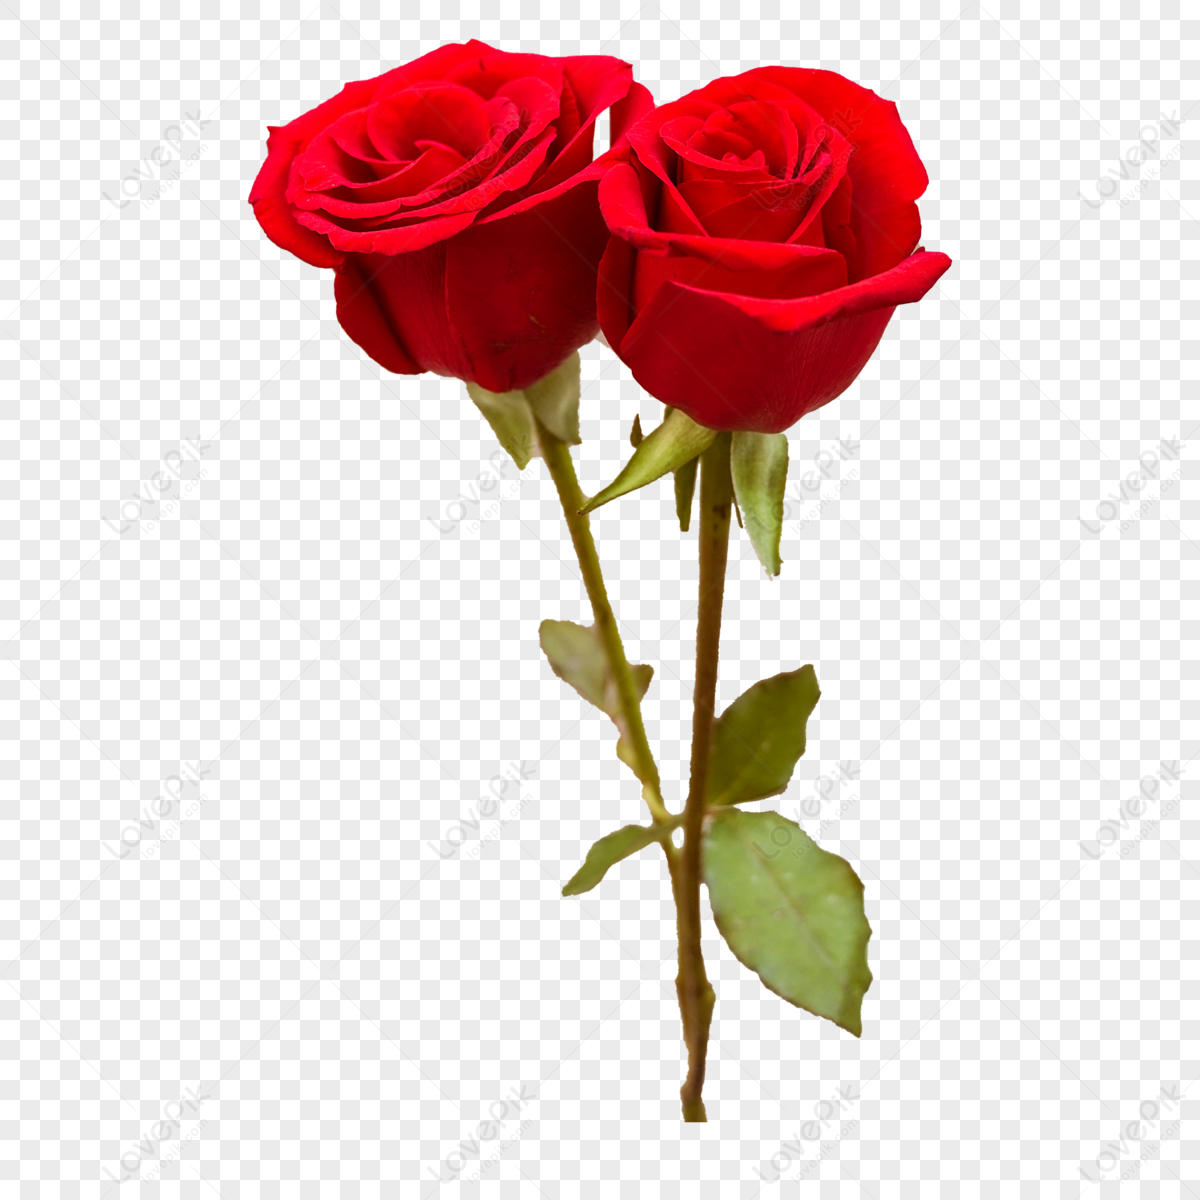 Two Beautiful Red Roses,flowers,rose Flowers,rose Flower PNG ...